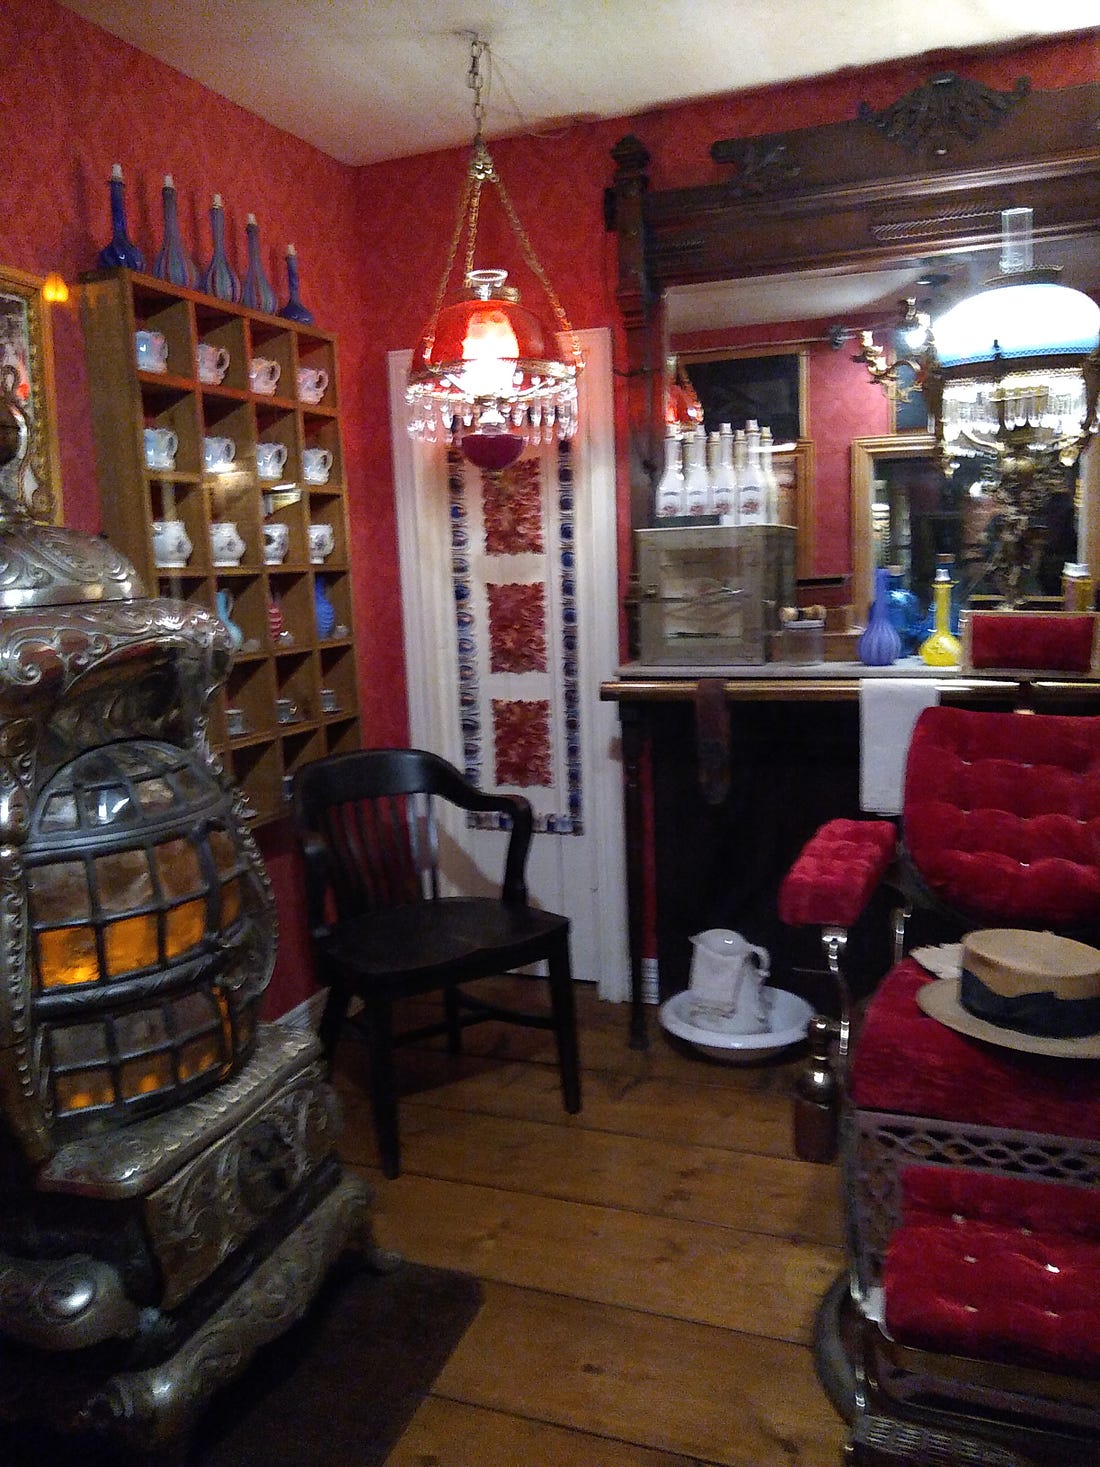 Victorian barbershop with chair, small bottles on shelves, and potbellied woodstove